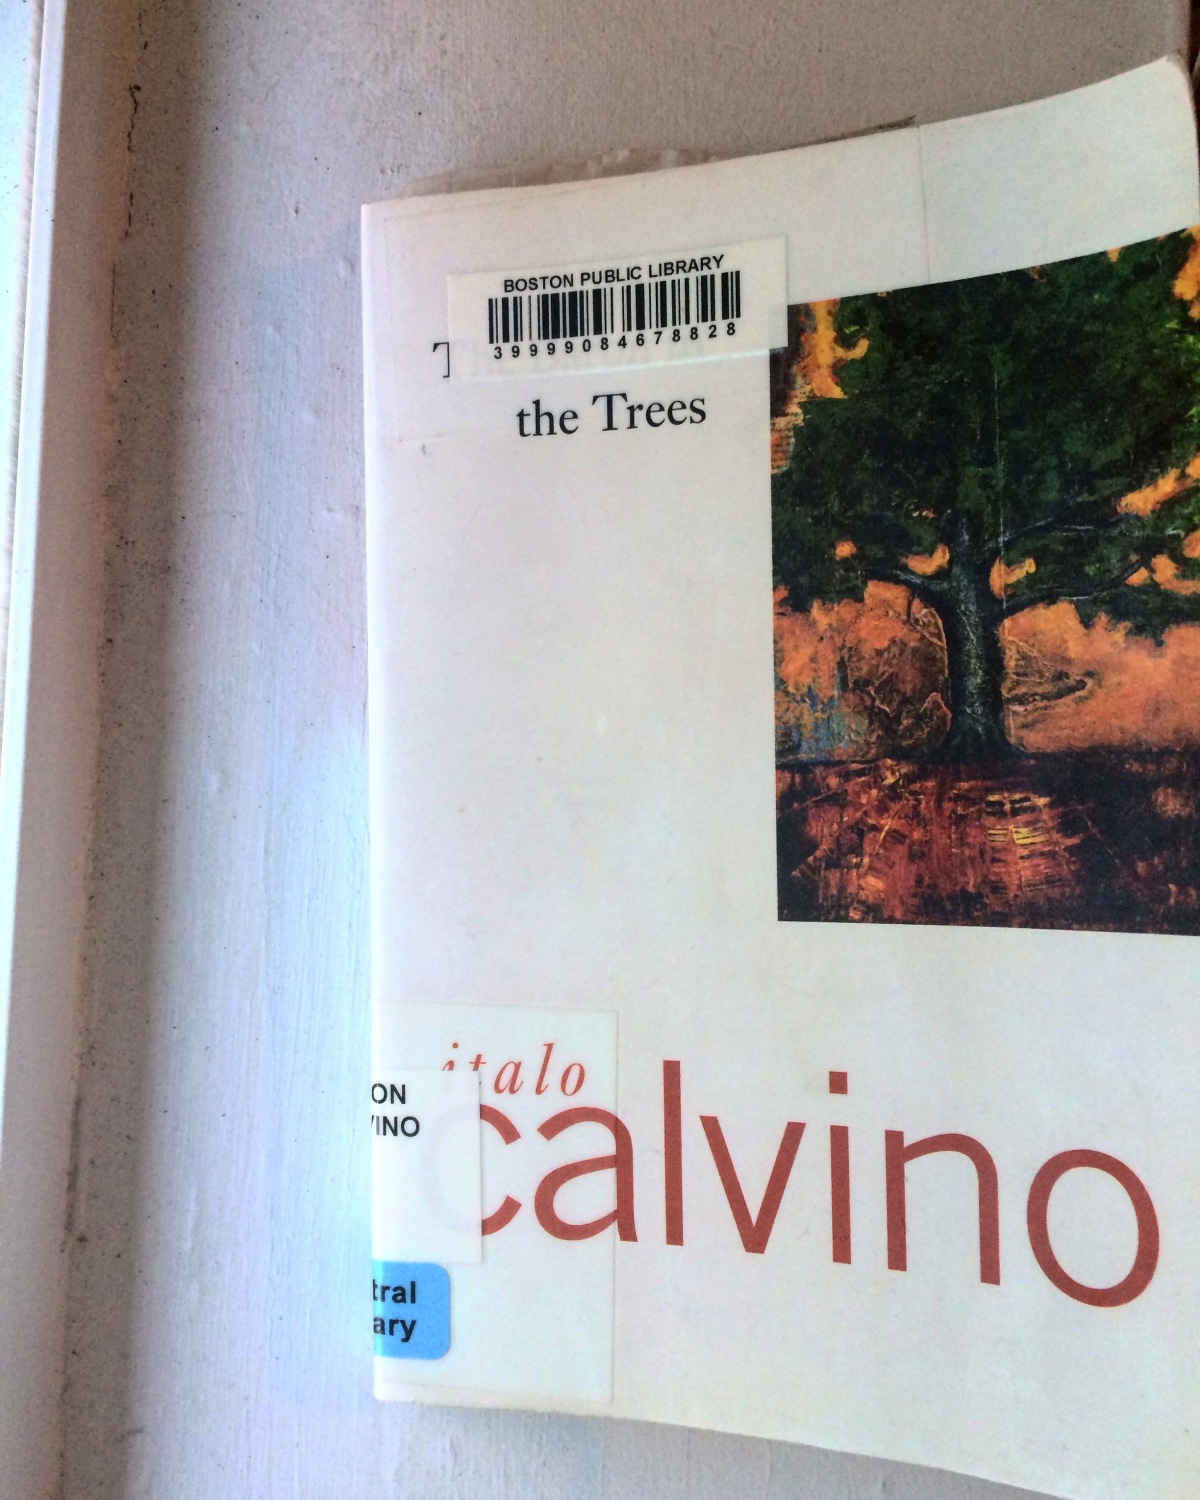 Five Things About The Baron in the Trees By Italo Calvino